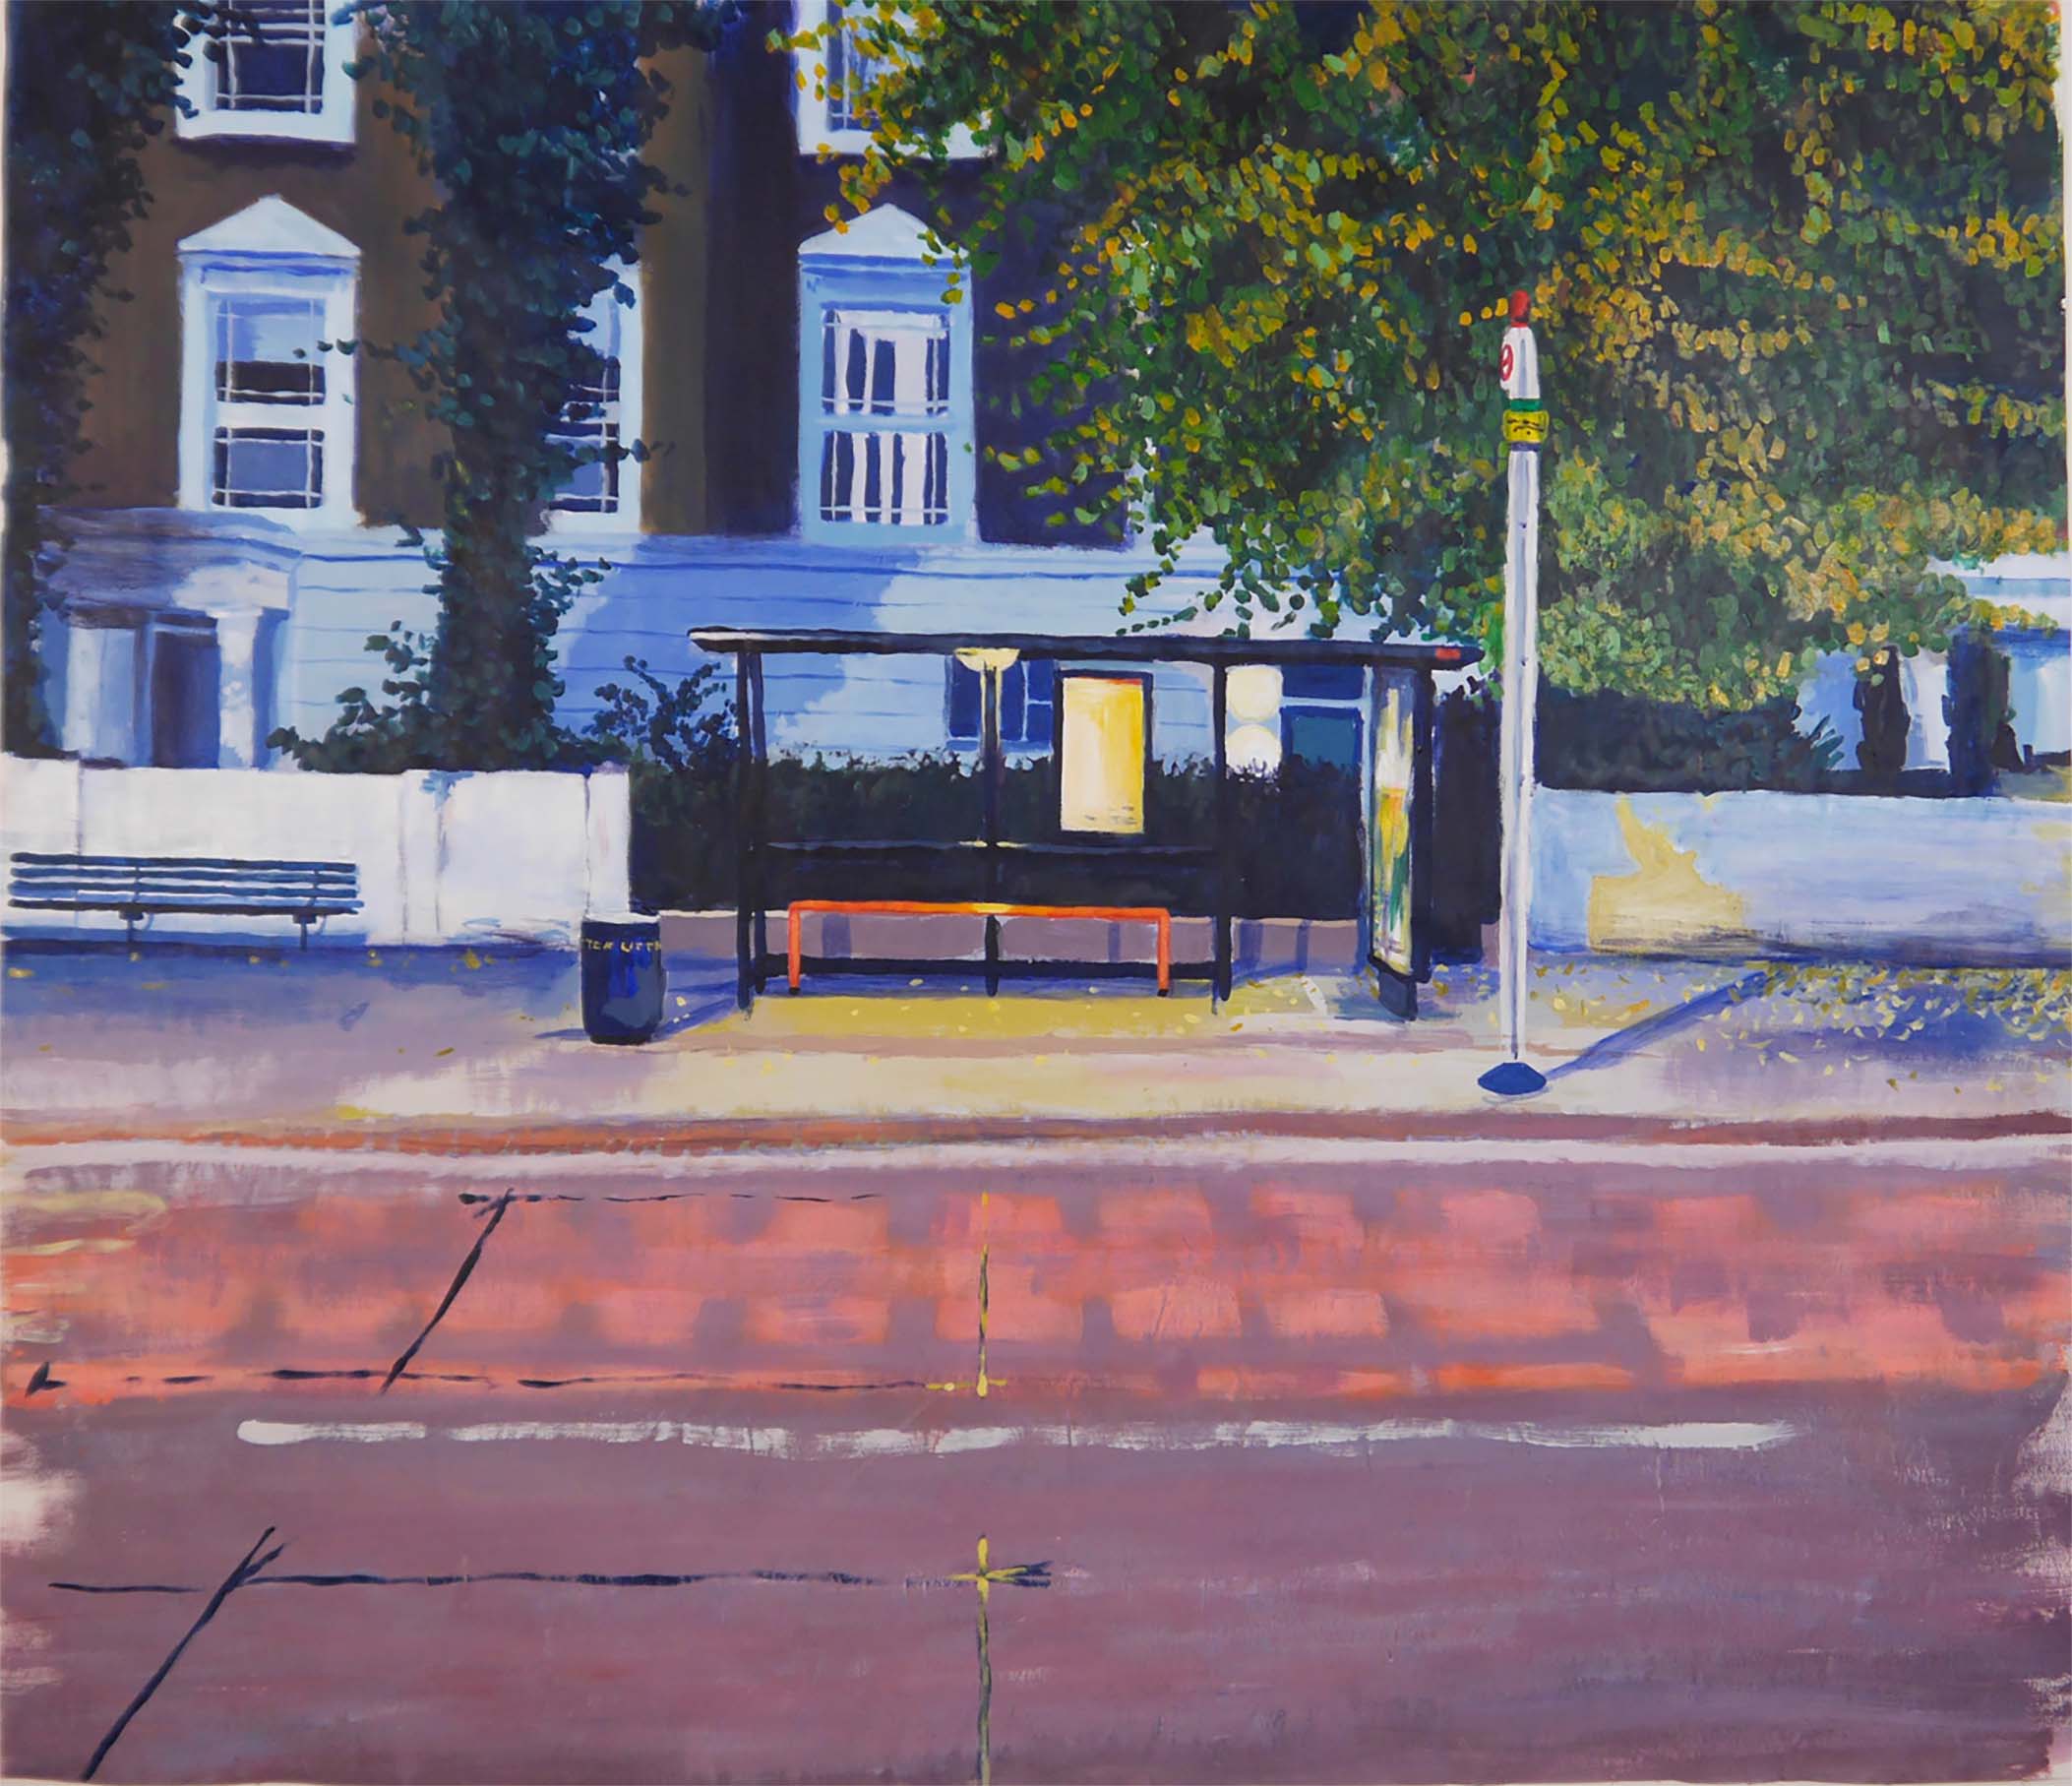    SOUTHGATE ROAD  135 x 115 cm (2016)  acrylic on 200 gsm paper  sold 